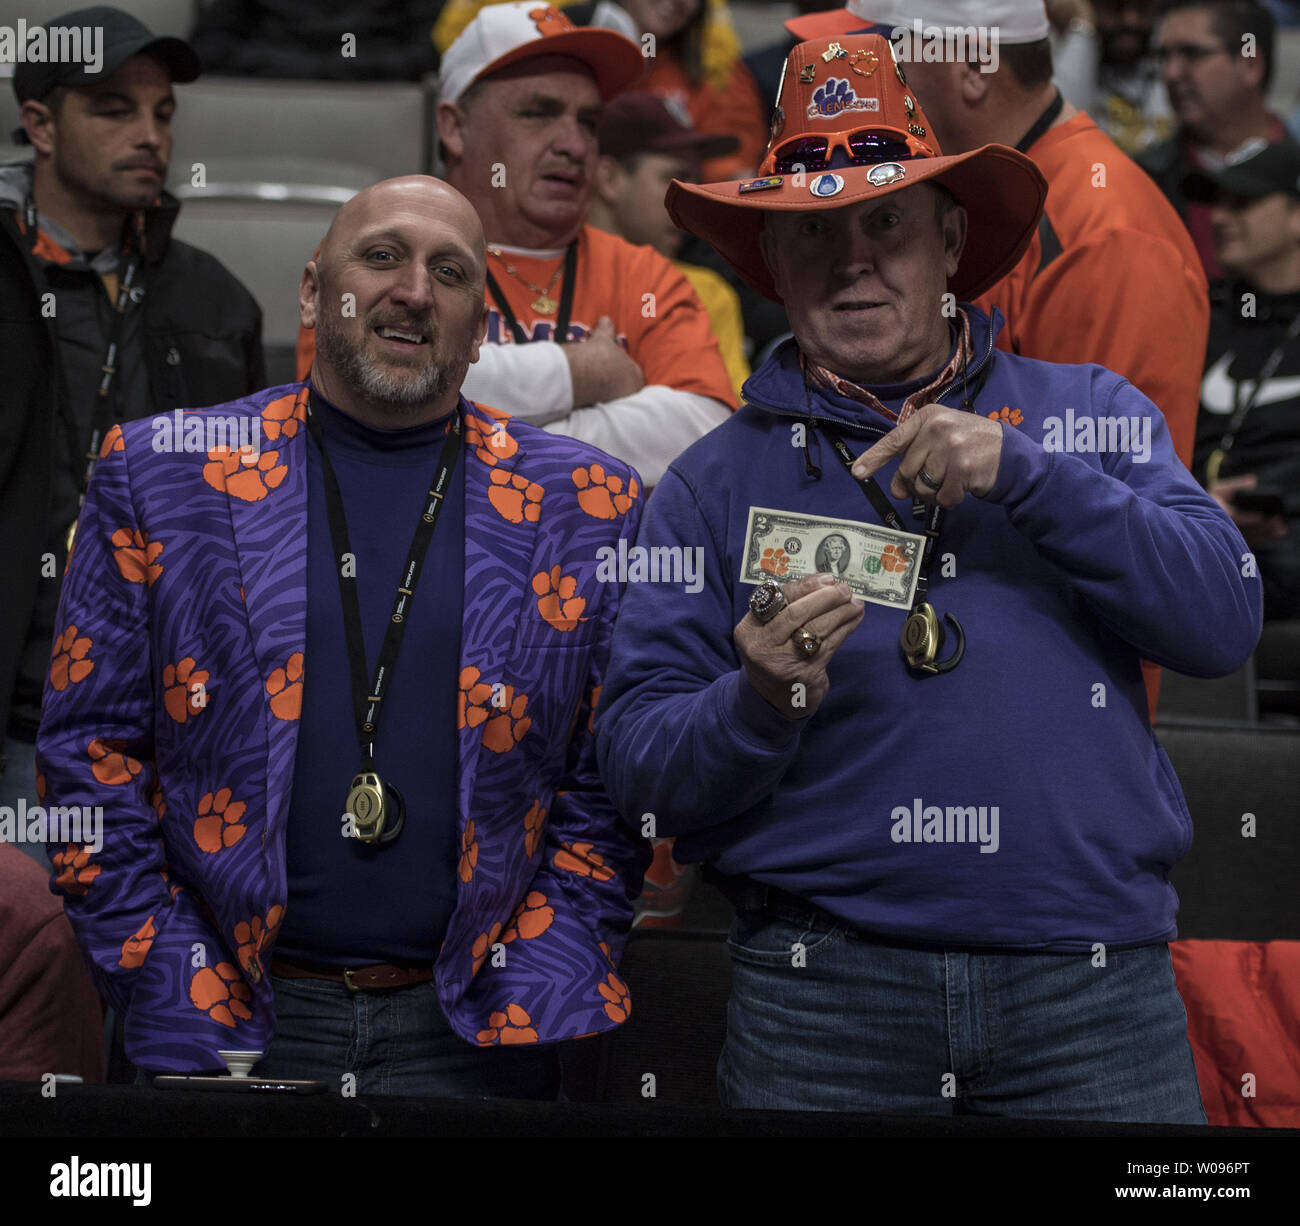 Clemson Tigers fans Andy Price (L) and Dean Cox attend Media Day for the 2019 College Football Playoff National Championship, at the SAP Center in San Jose, California on January 5, 2019. Cox is paying for things in San Jose with two dollar bills stamped with tiger's paws to show their impact on the local economy. Alabama Crimson Tide will play the Clemson Tigers at Levi's Stadium in Santa Clara, California on January 7.    Photo by Terry Schmitt/UPI Stock Photo